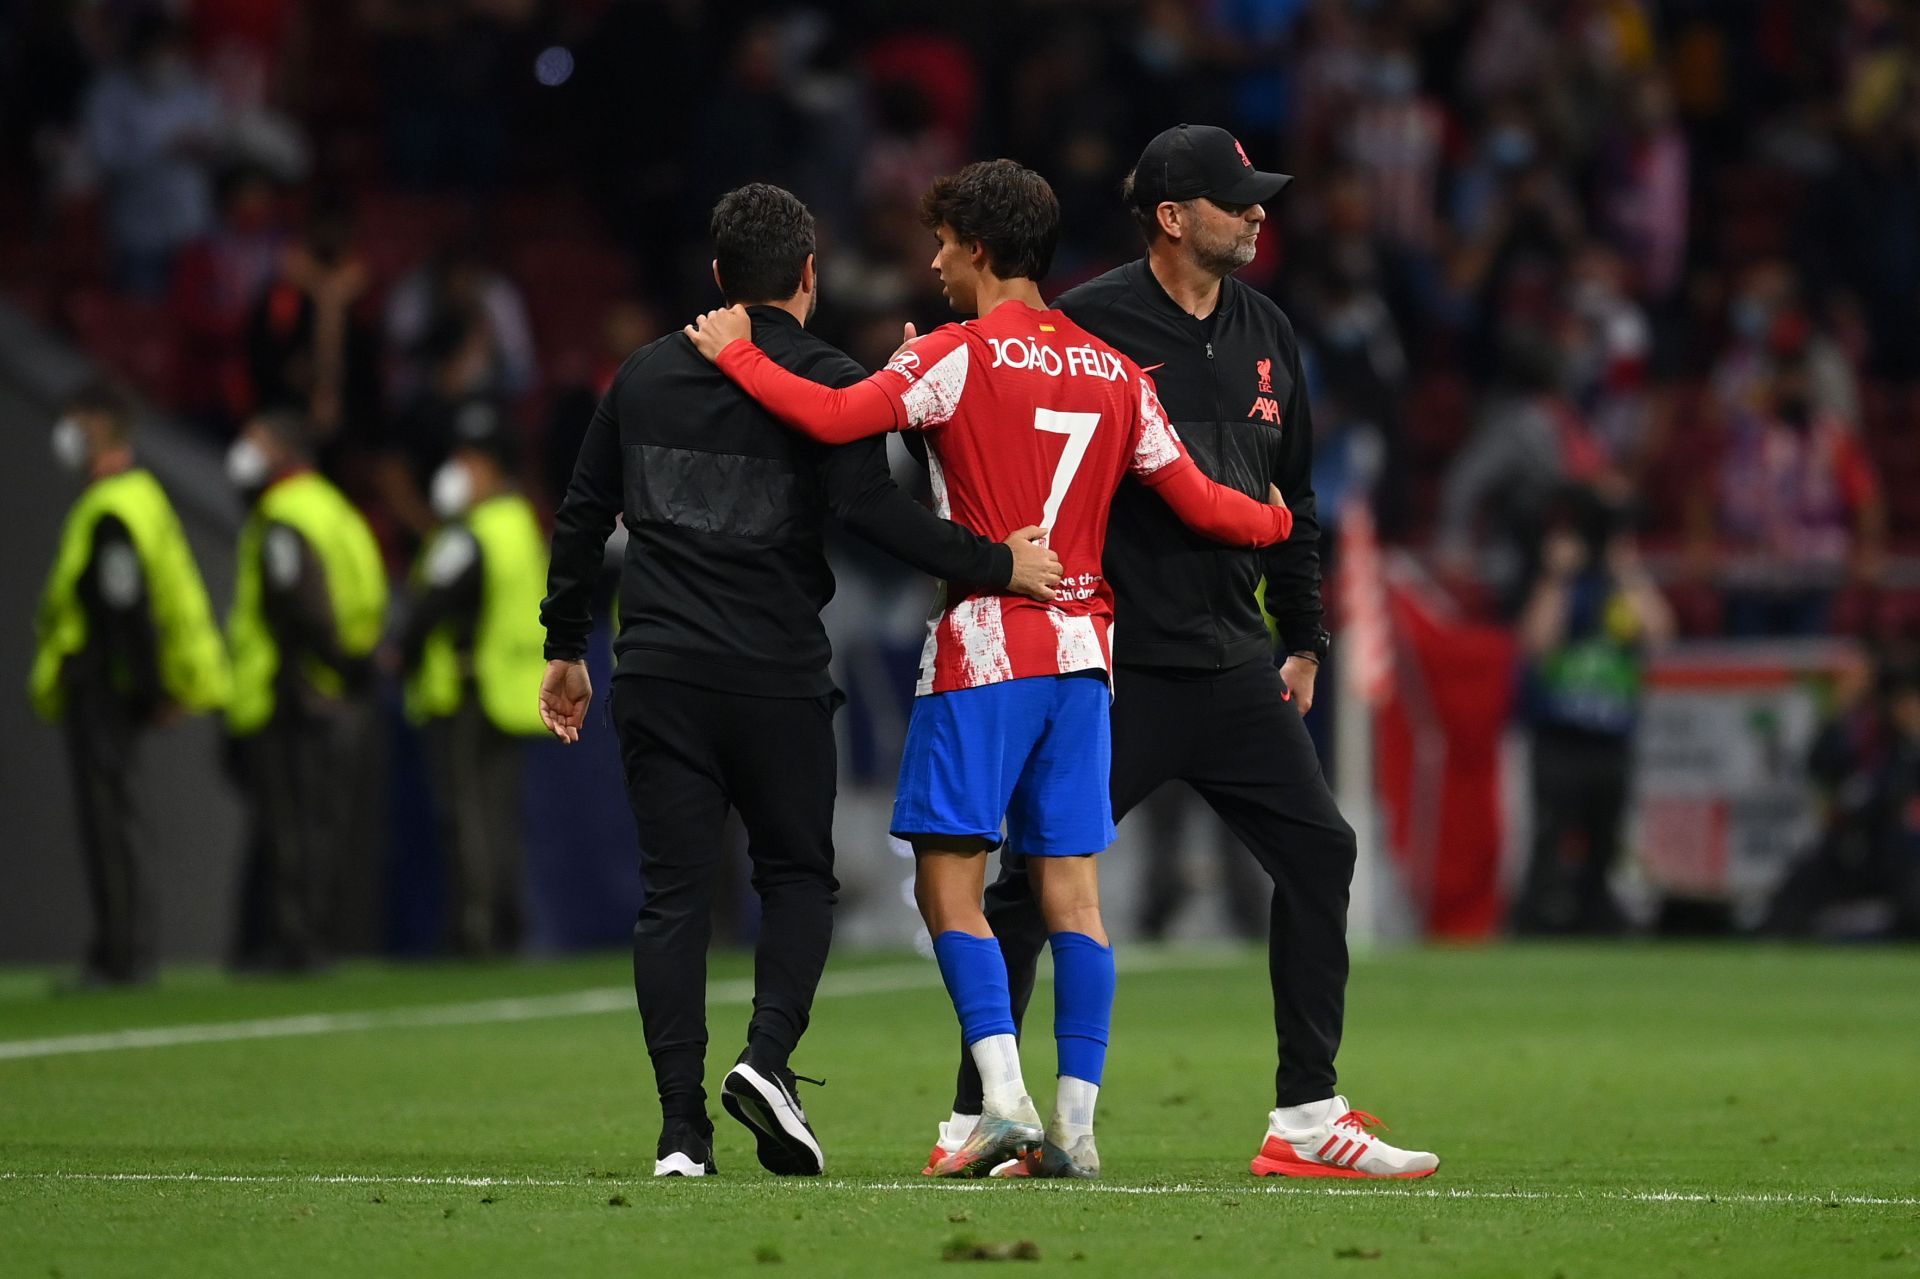 Joao Felix was superb on the ball for Atletico on the night.